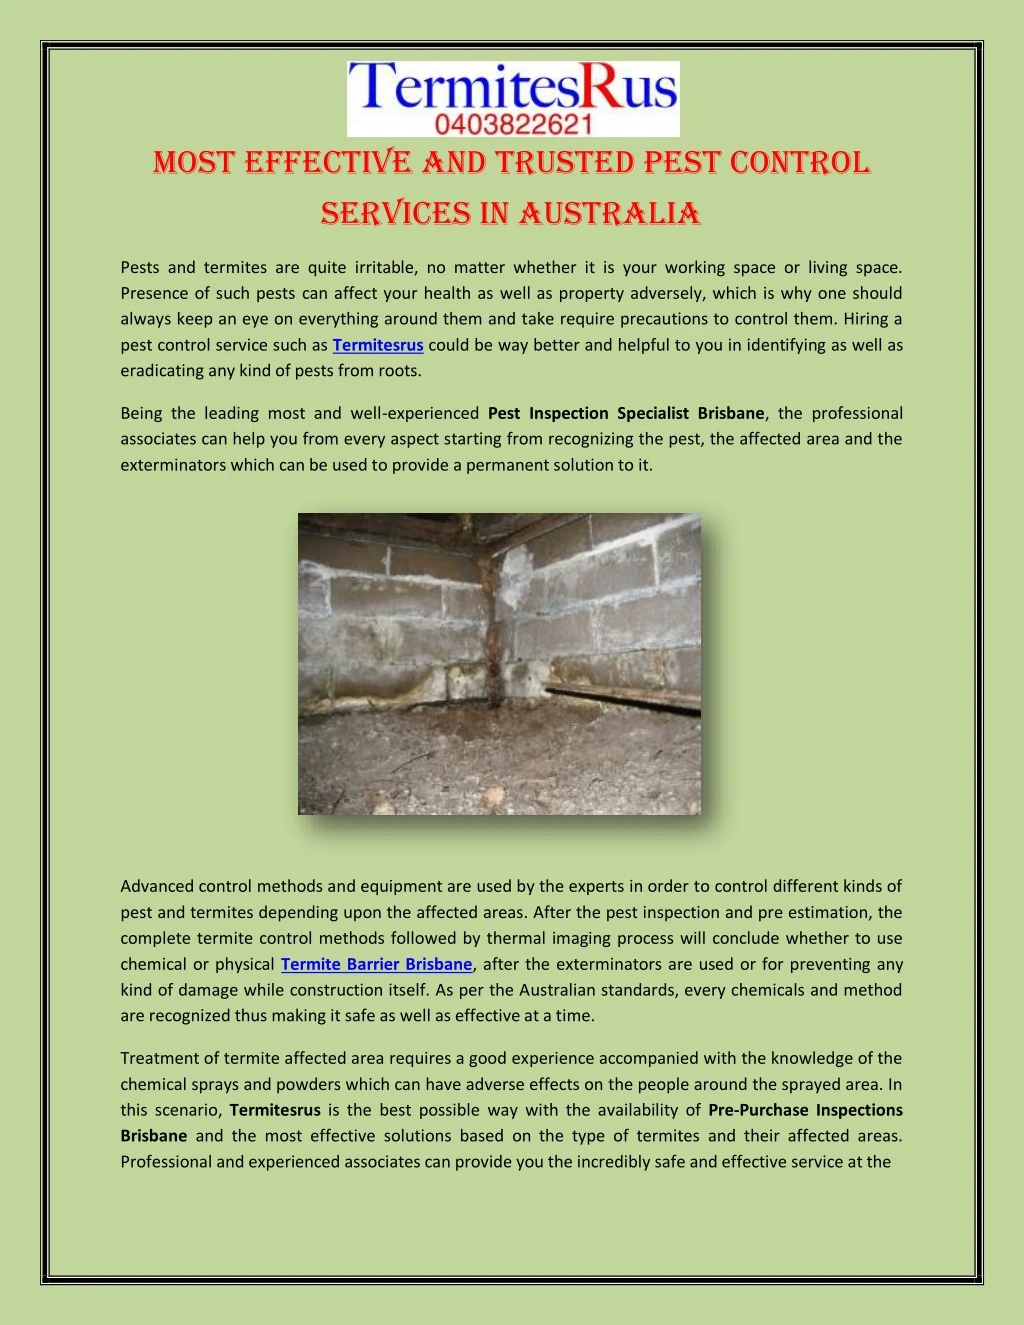 most effective and trusted pest control services